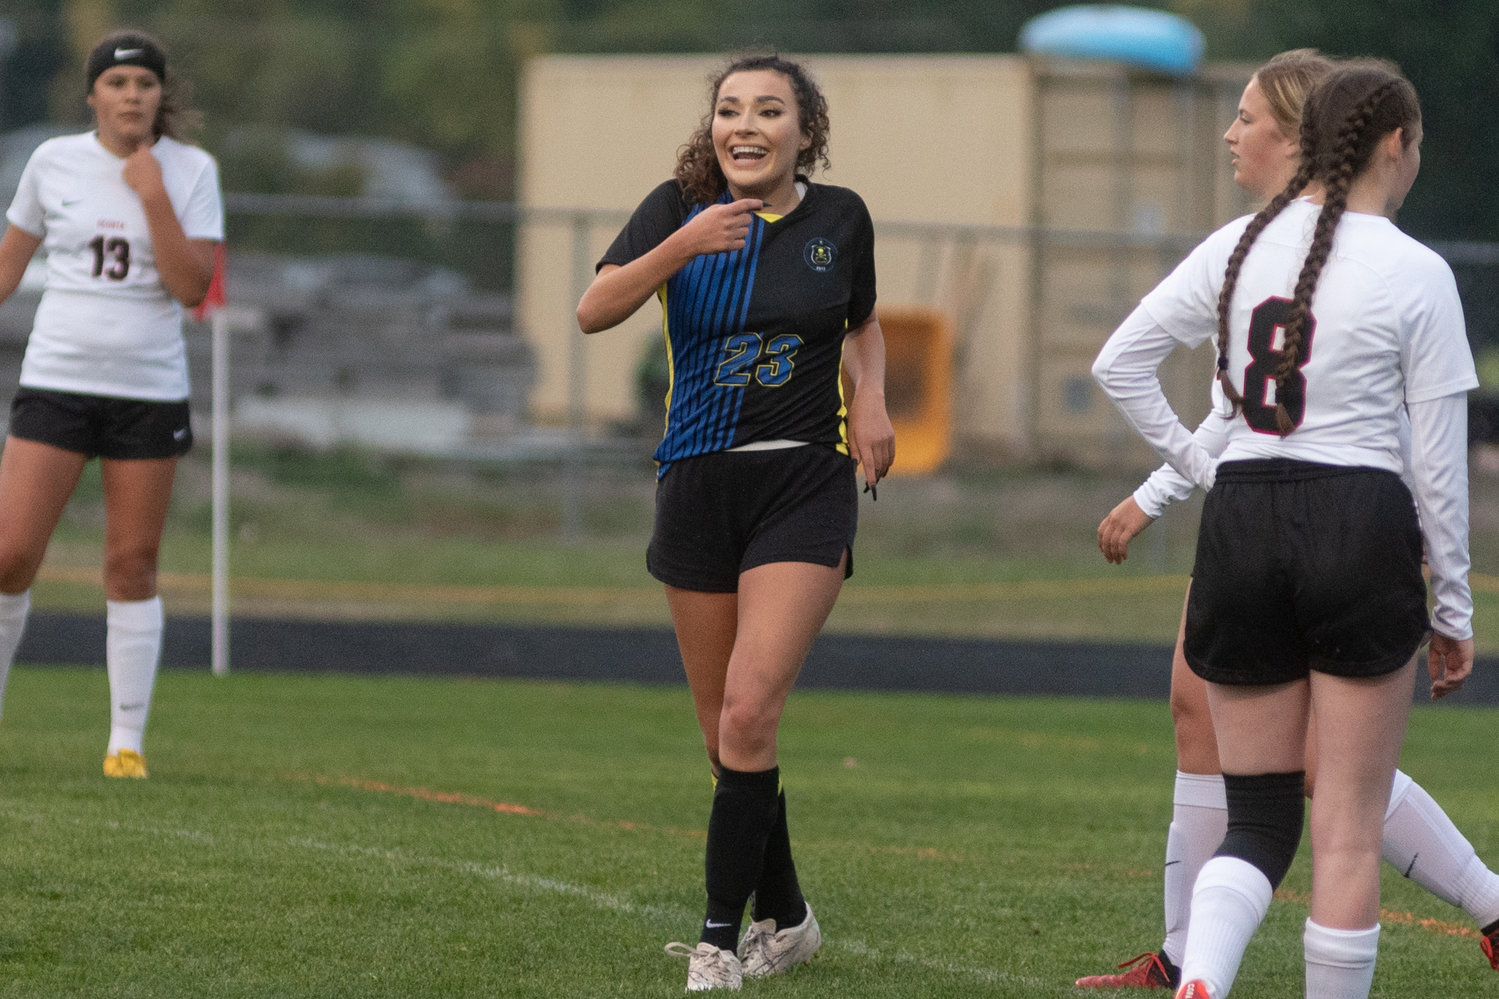 Adna senior Presley Smith smiles after scoring a goal in the Pirates game against Ocosta Wednesday night.